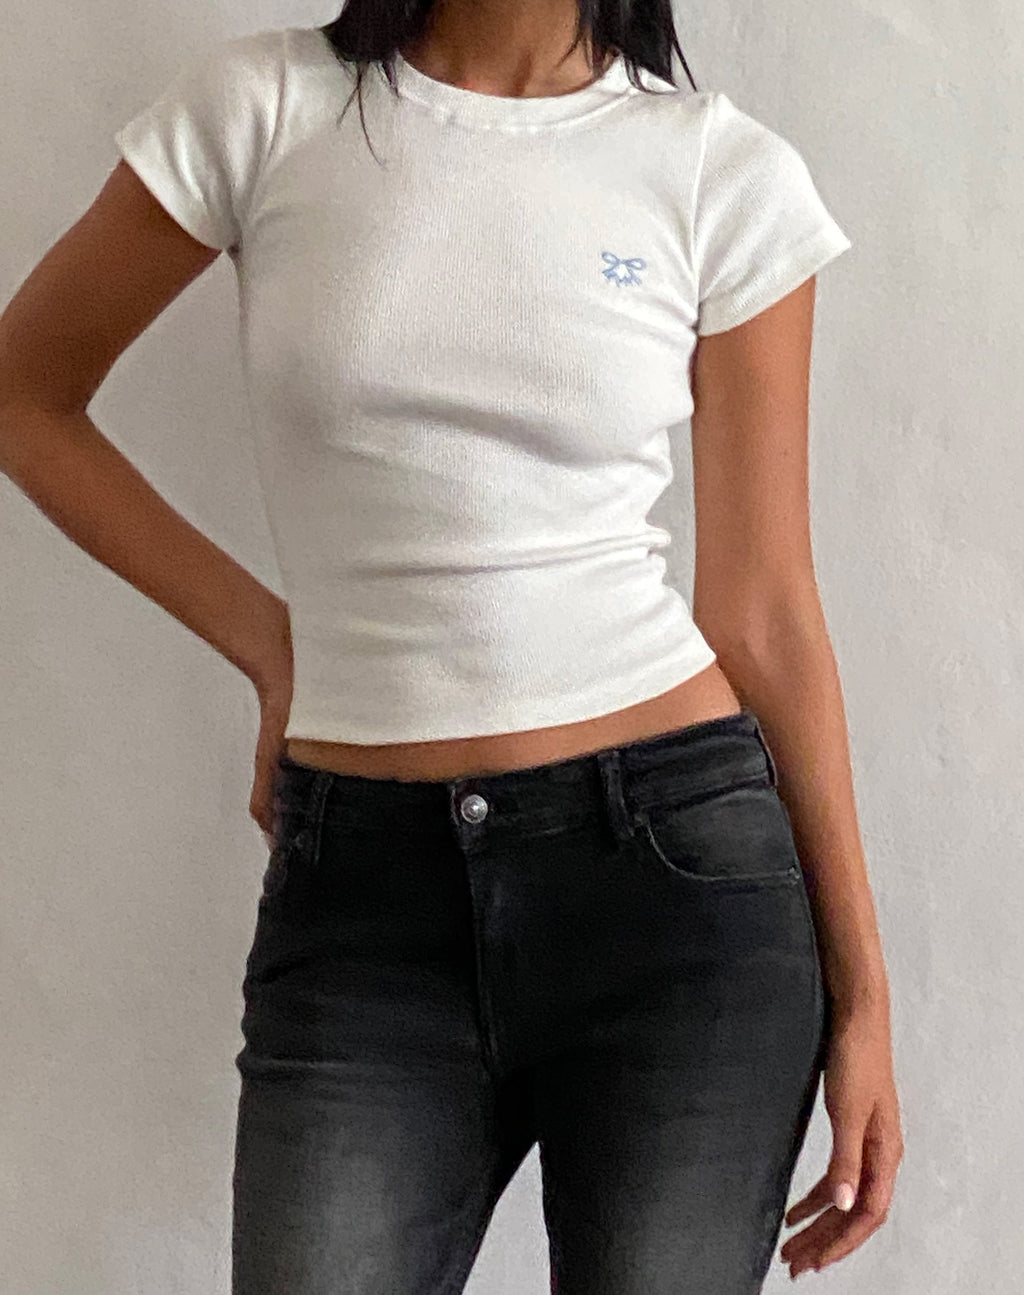 Suti Ribbed Baby Tee in Off White with Blue Bow M Embroidery